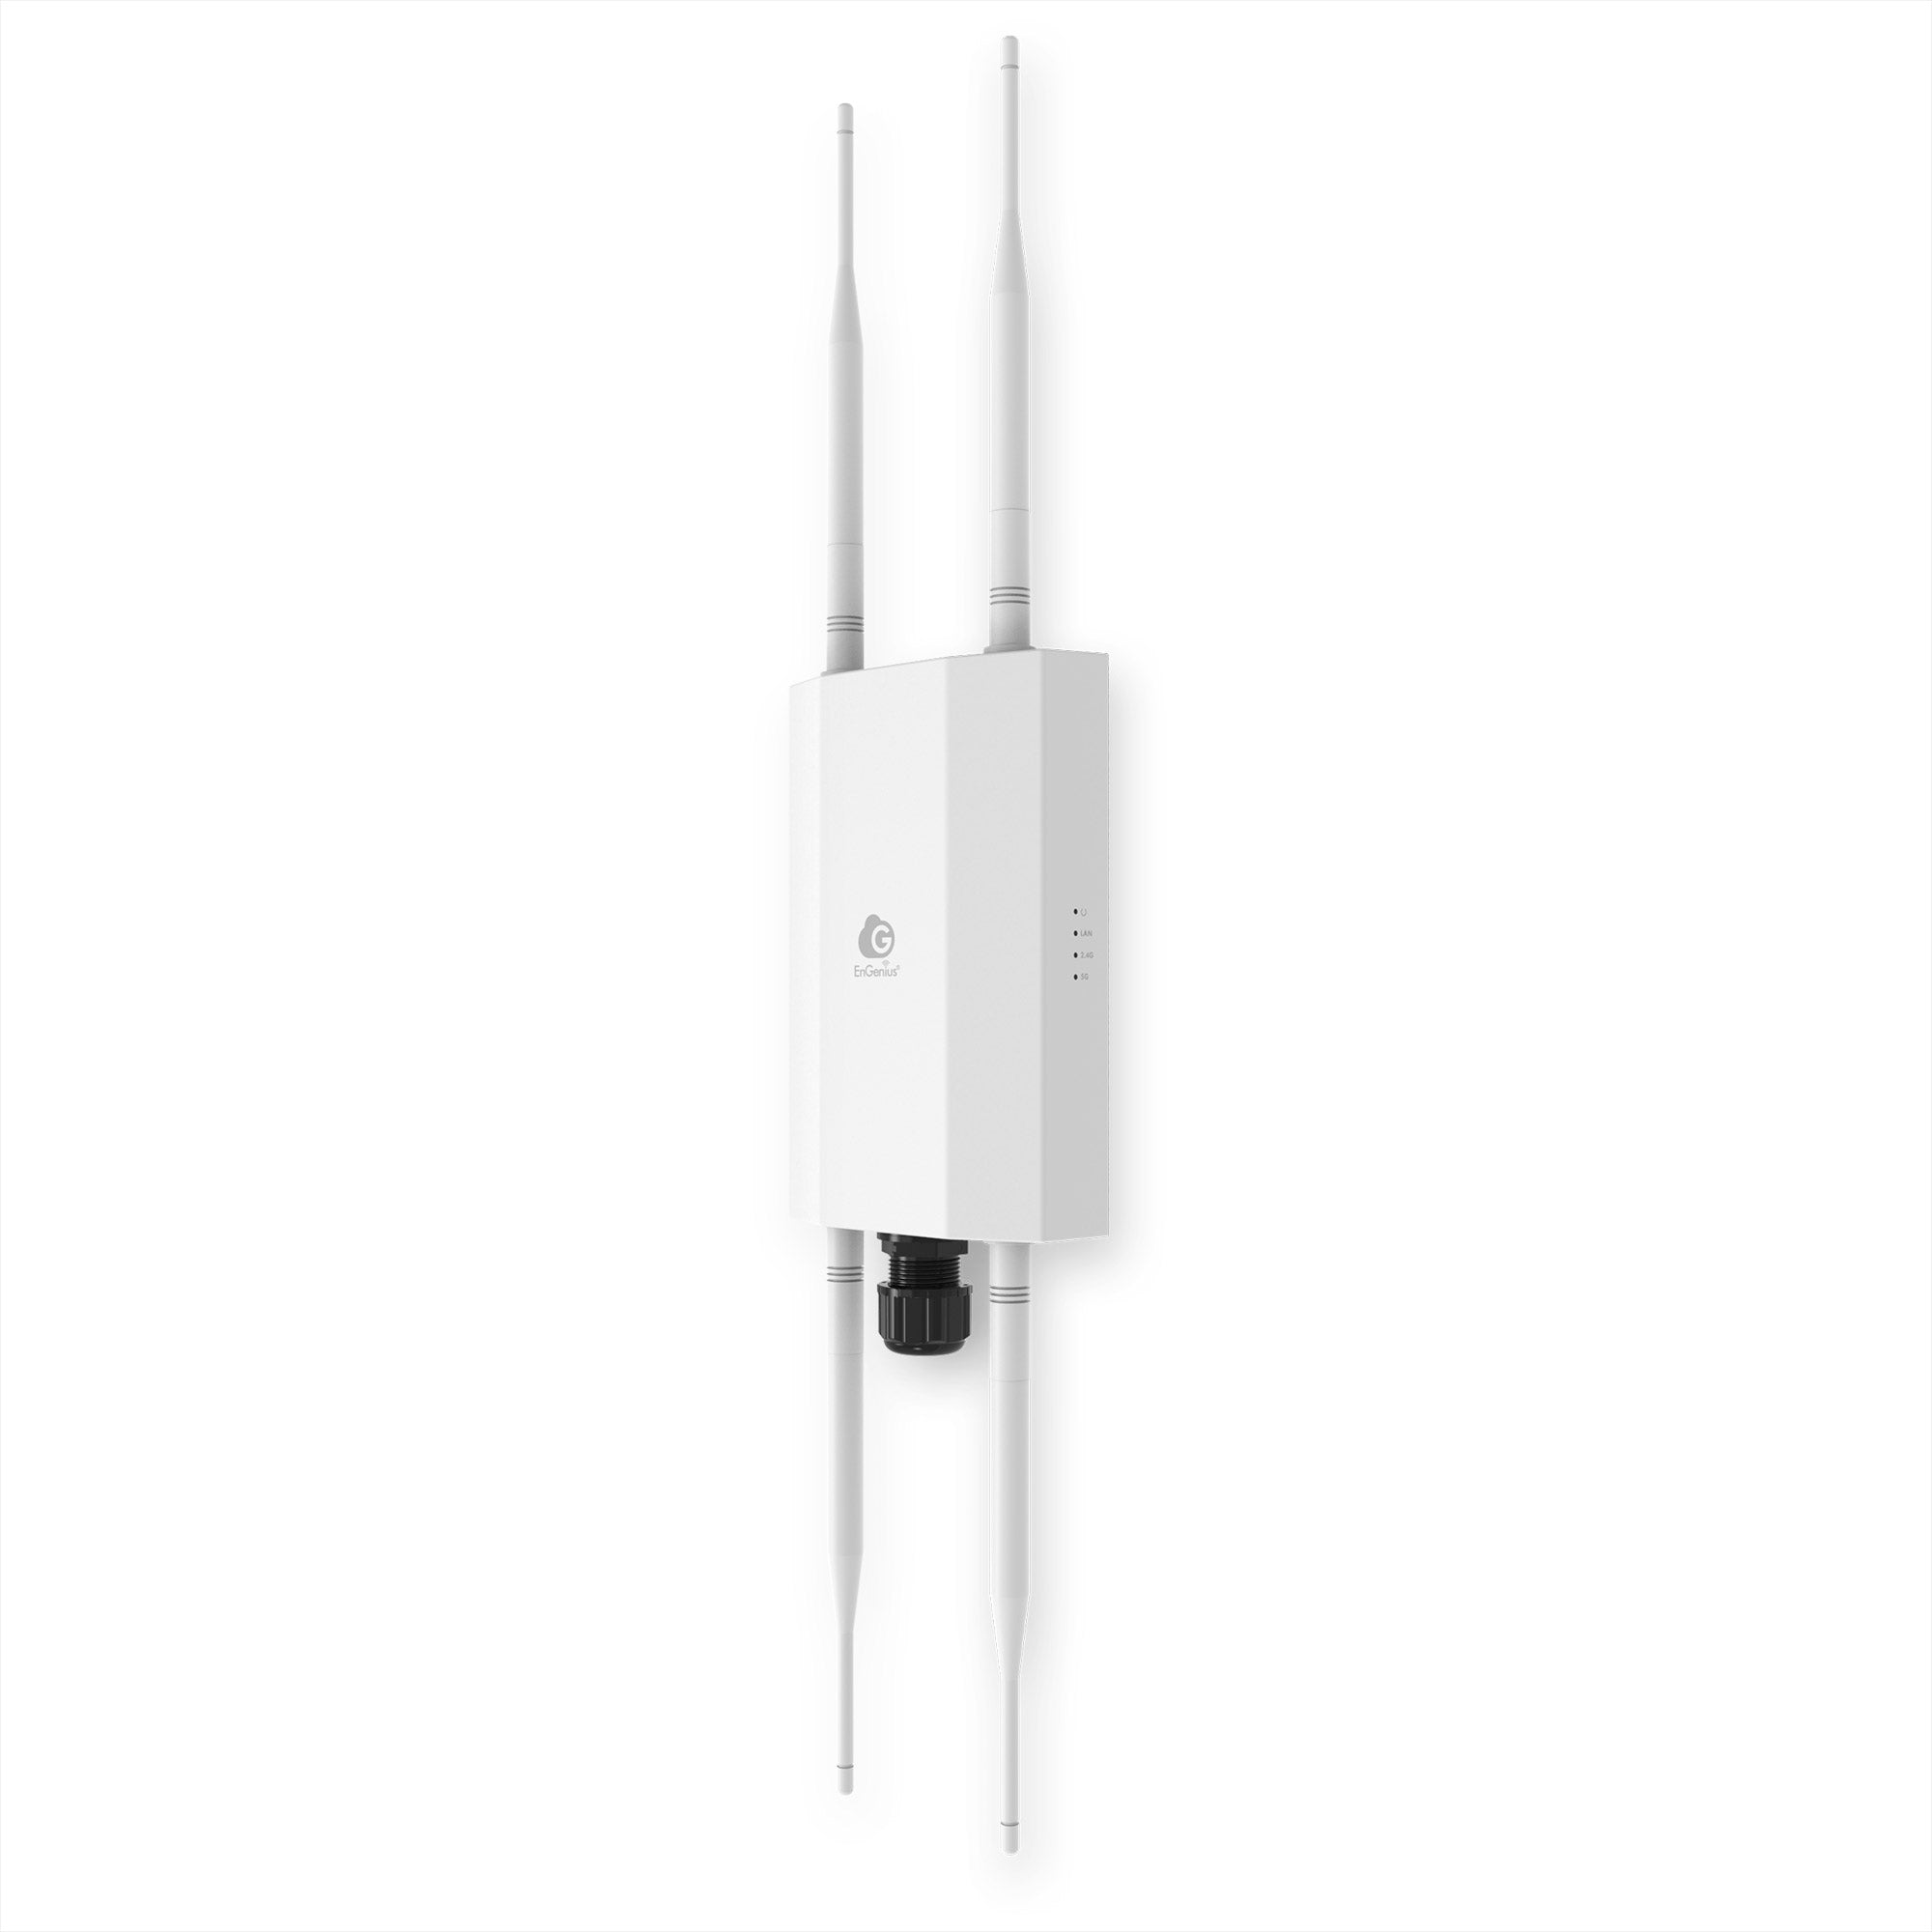 EnGenius ECW260 - Cloud Managed Access Point ECW260 Outdoor | AL-VoIP Store